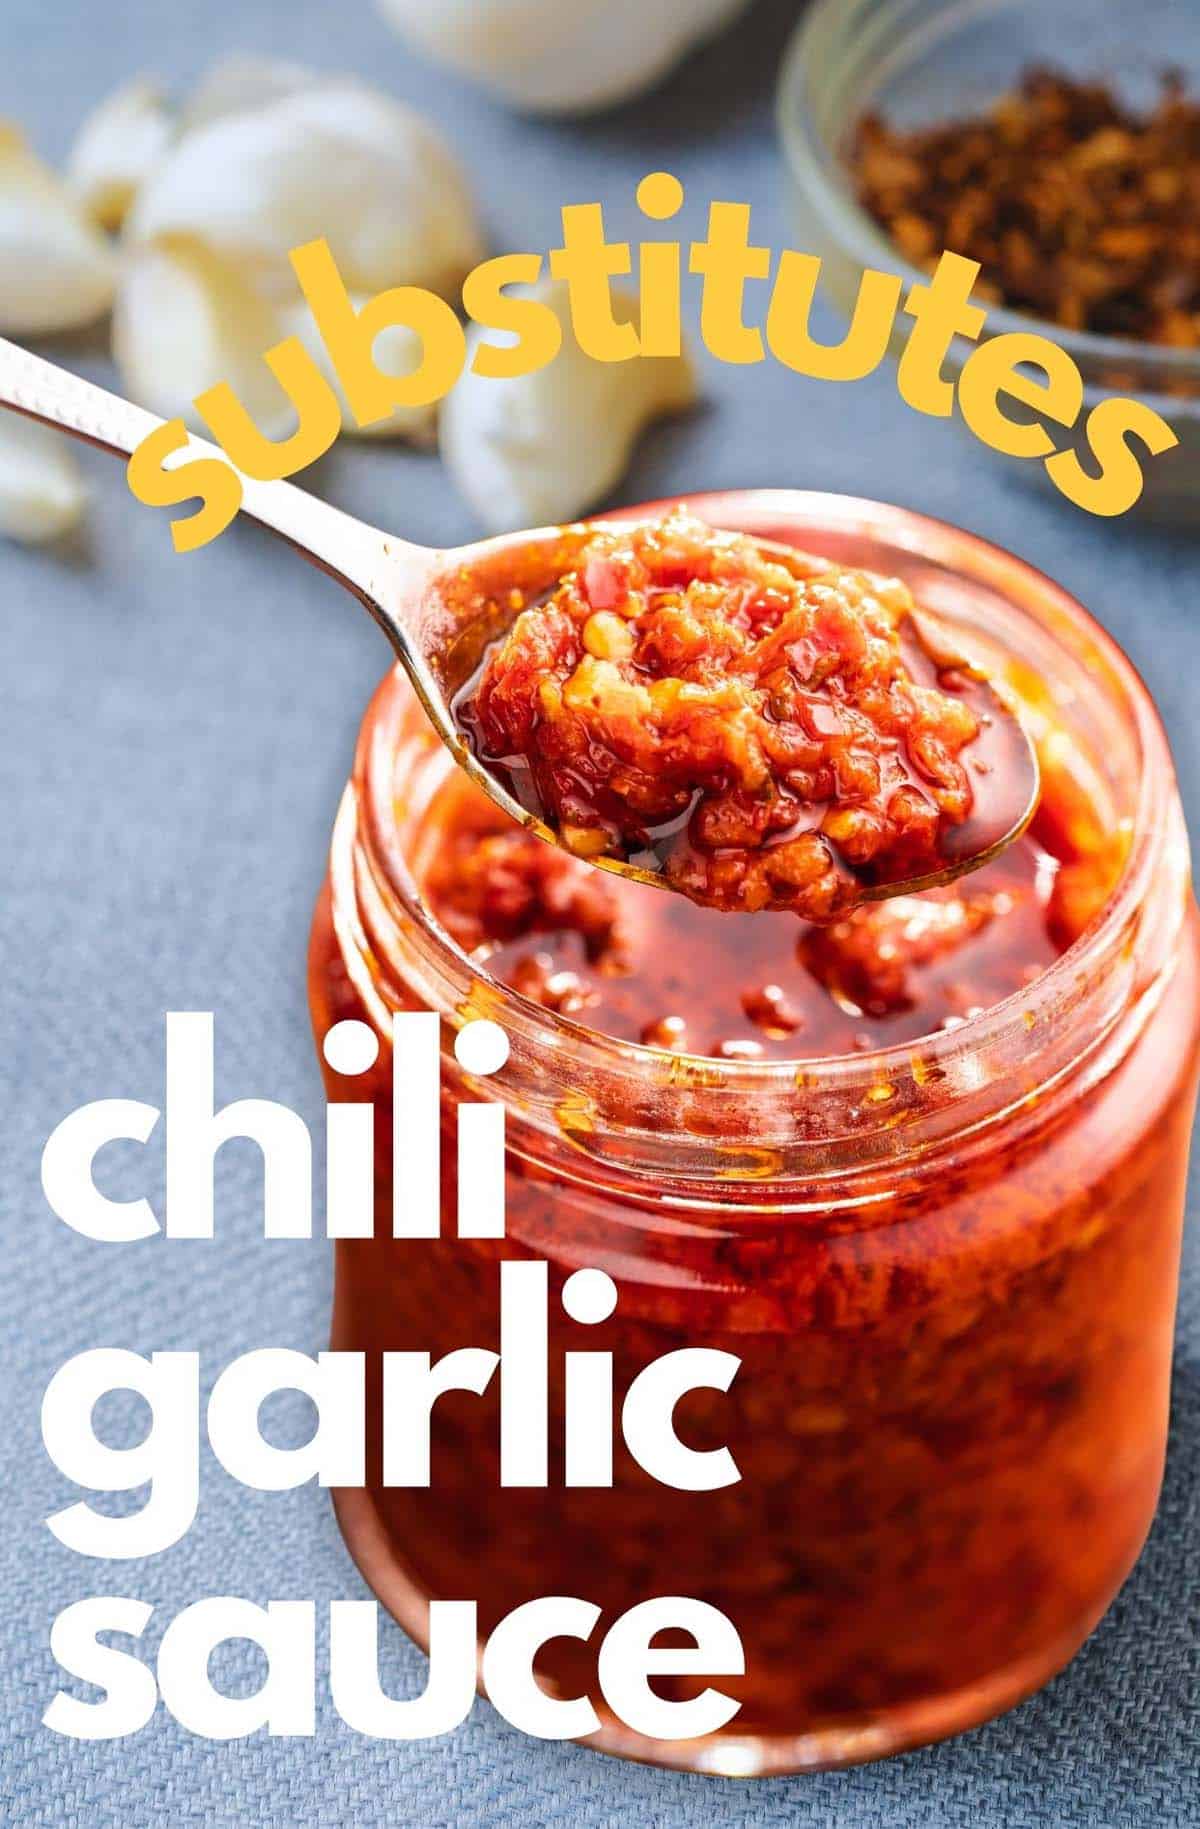 Variety of Chili Garlic Sauce Substitute alternatives on a kitchen table